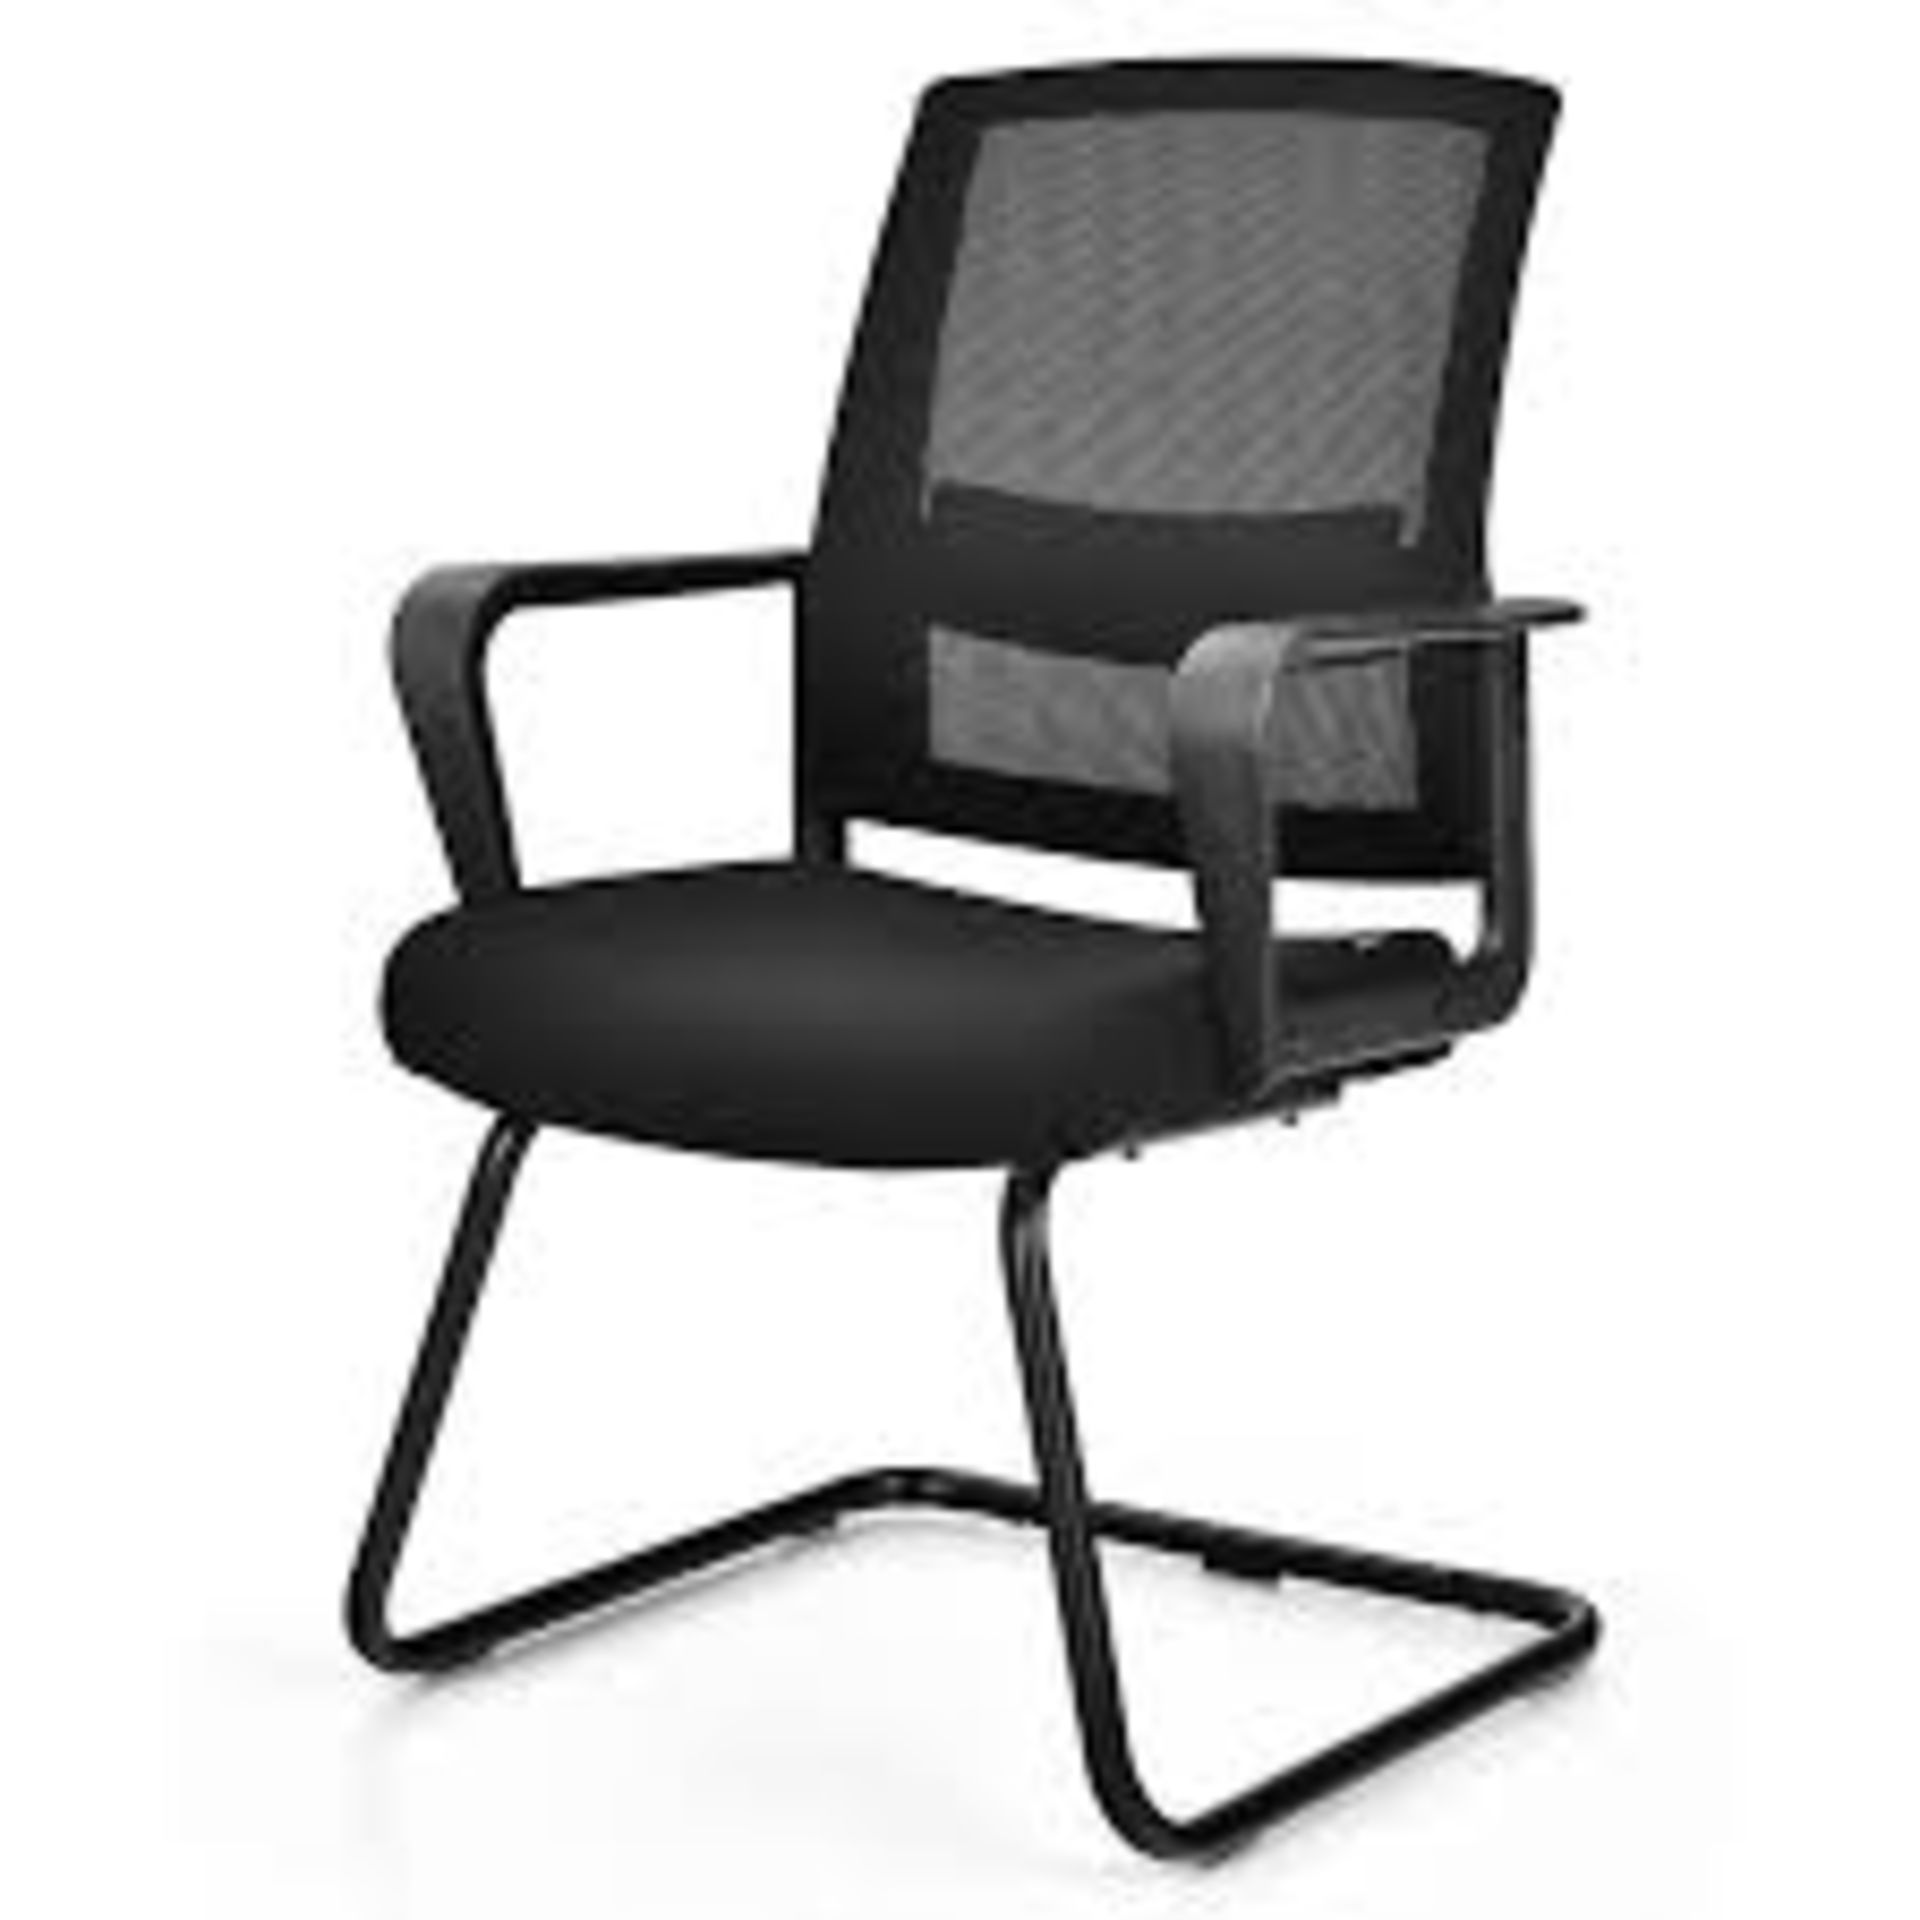 Mid Mesh Back Reception Chair with Adjustable Lumbar Support and Sled Base-Black. - R14.13.